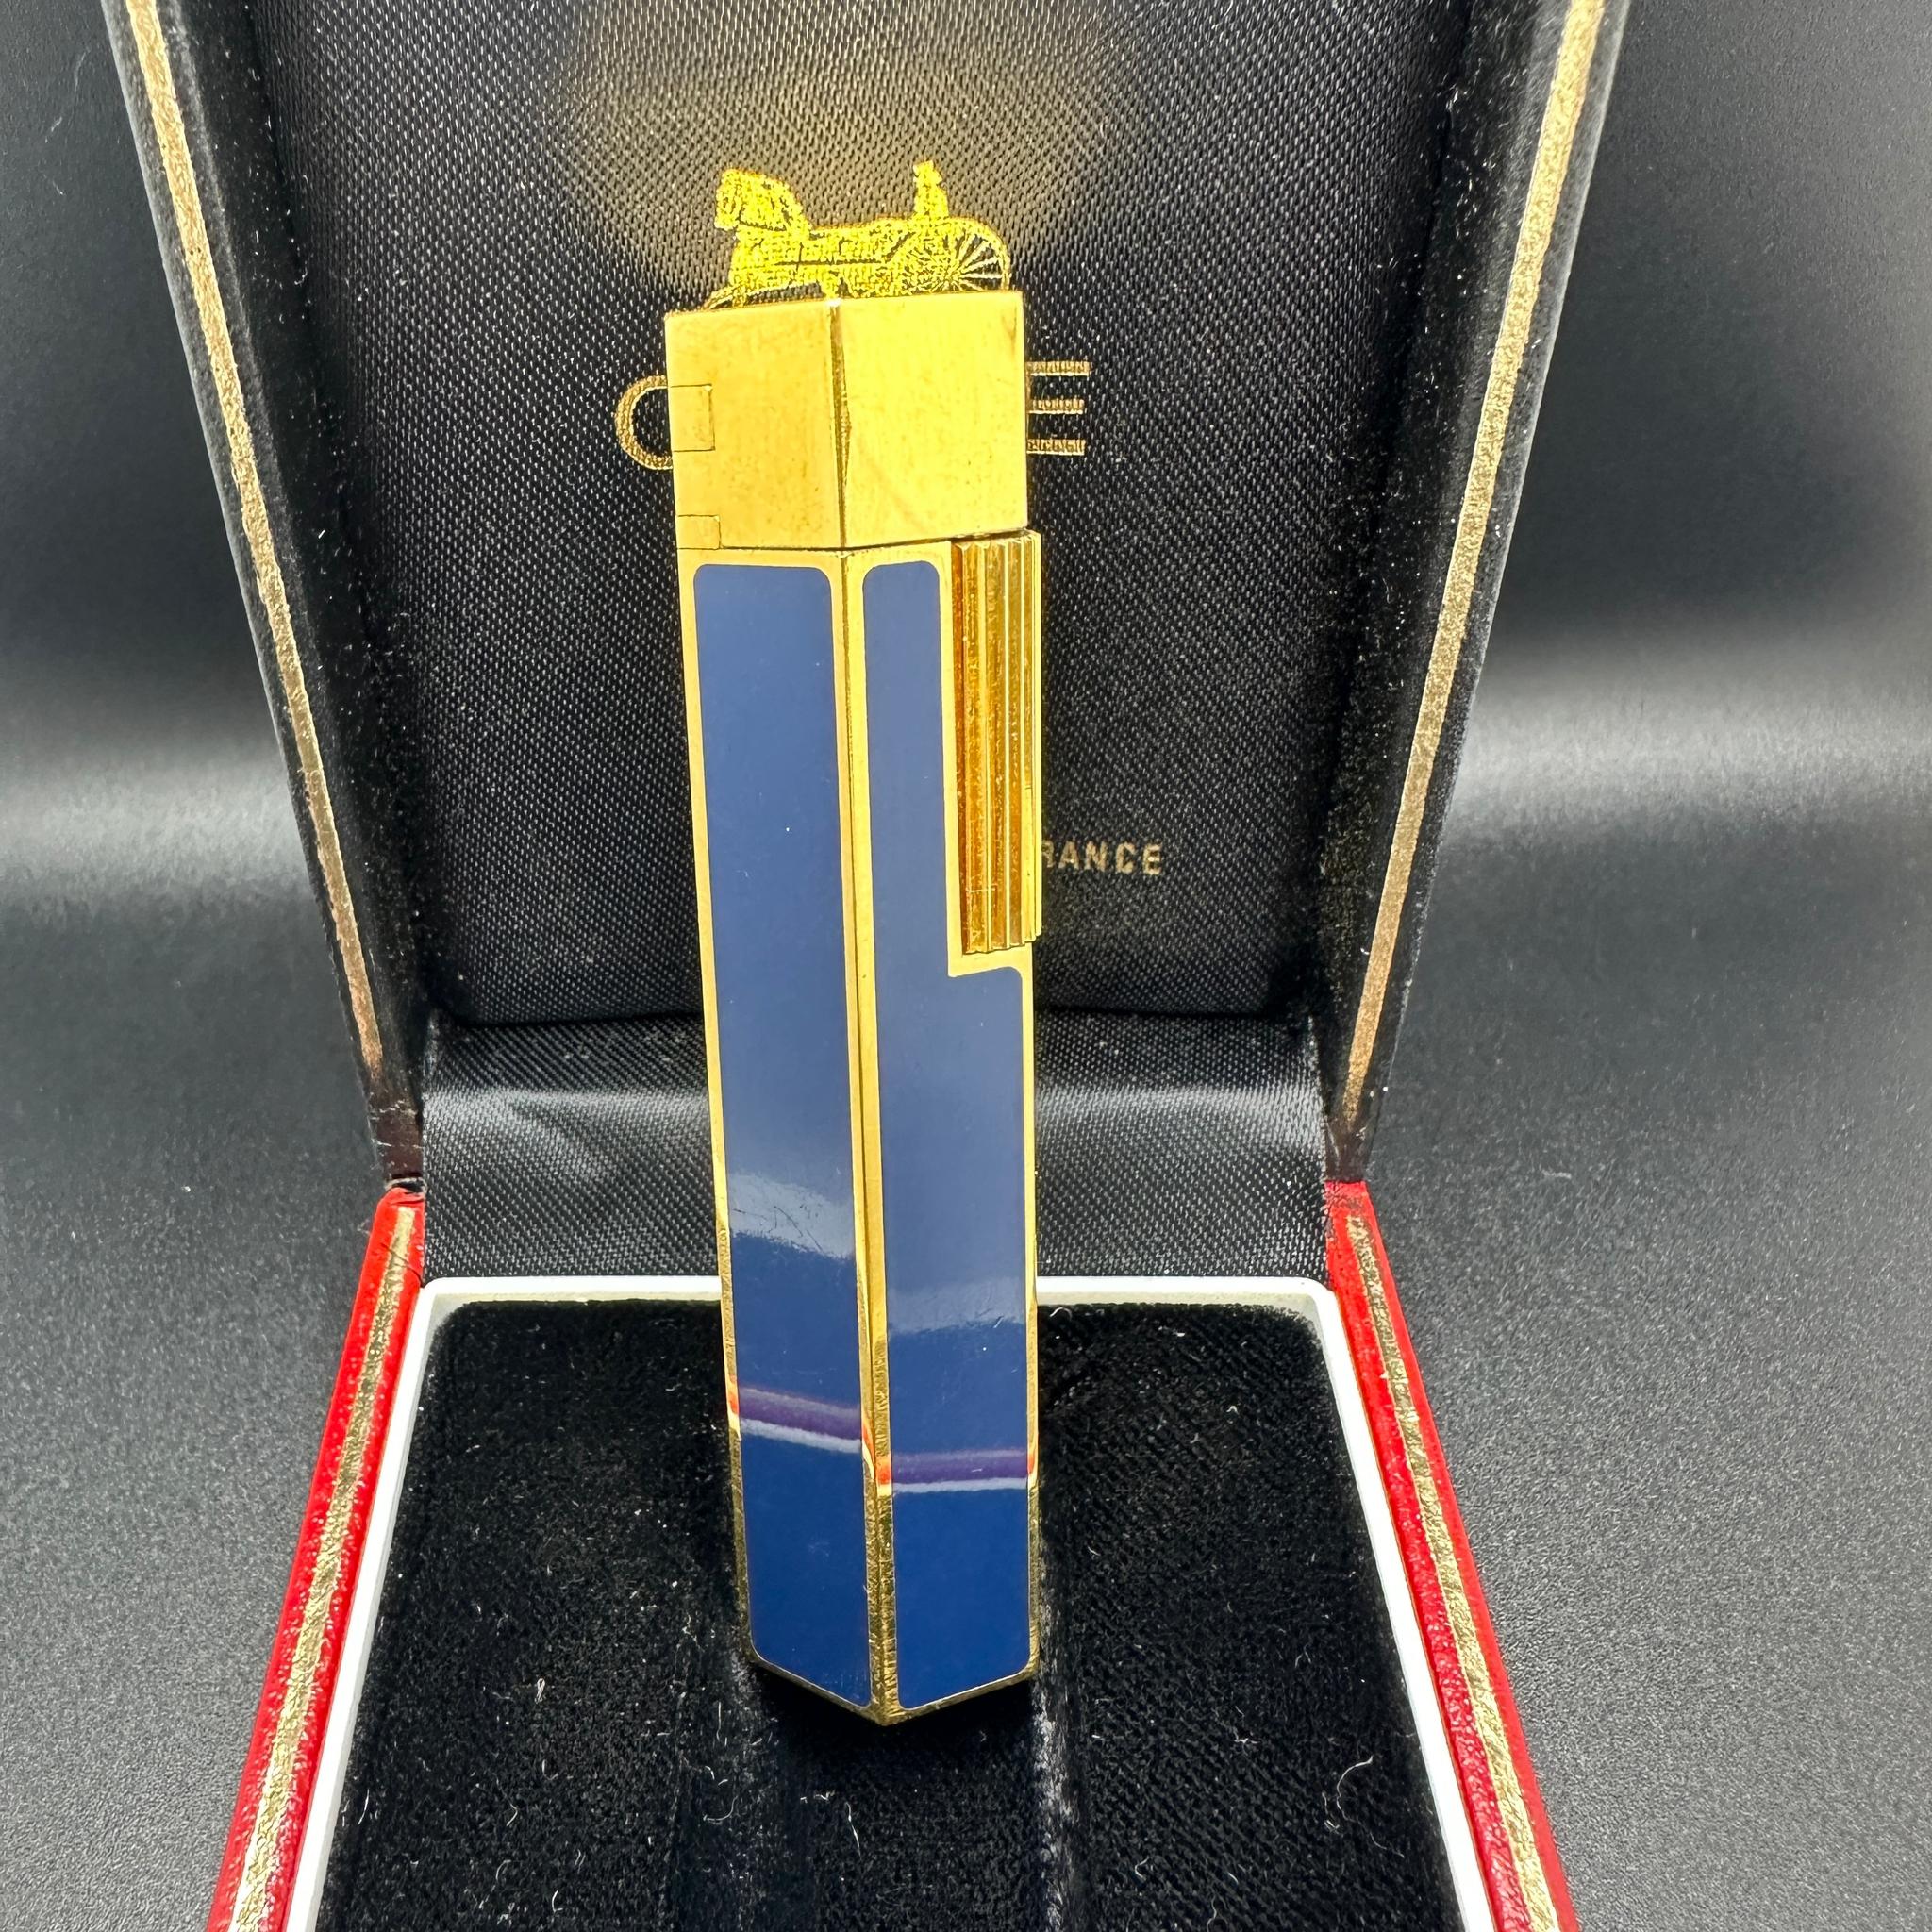 Celine hexagonal lighter, Blue Lacquer and Gold Plated  
Vintage rare retro 
Circa 1980s
Rare mint condition. 
CELINE Blue Lacquer lighter original vintage 1980 Gold plated, hexagonal shape 
size 3.1 x 0.8x 0.4 in box size 4 x 2.8 x 1.2 in 
Made in